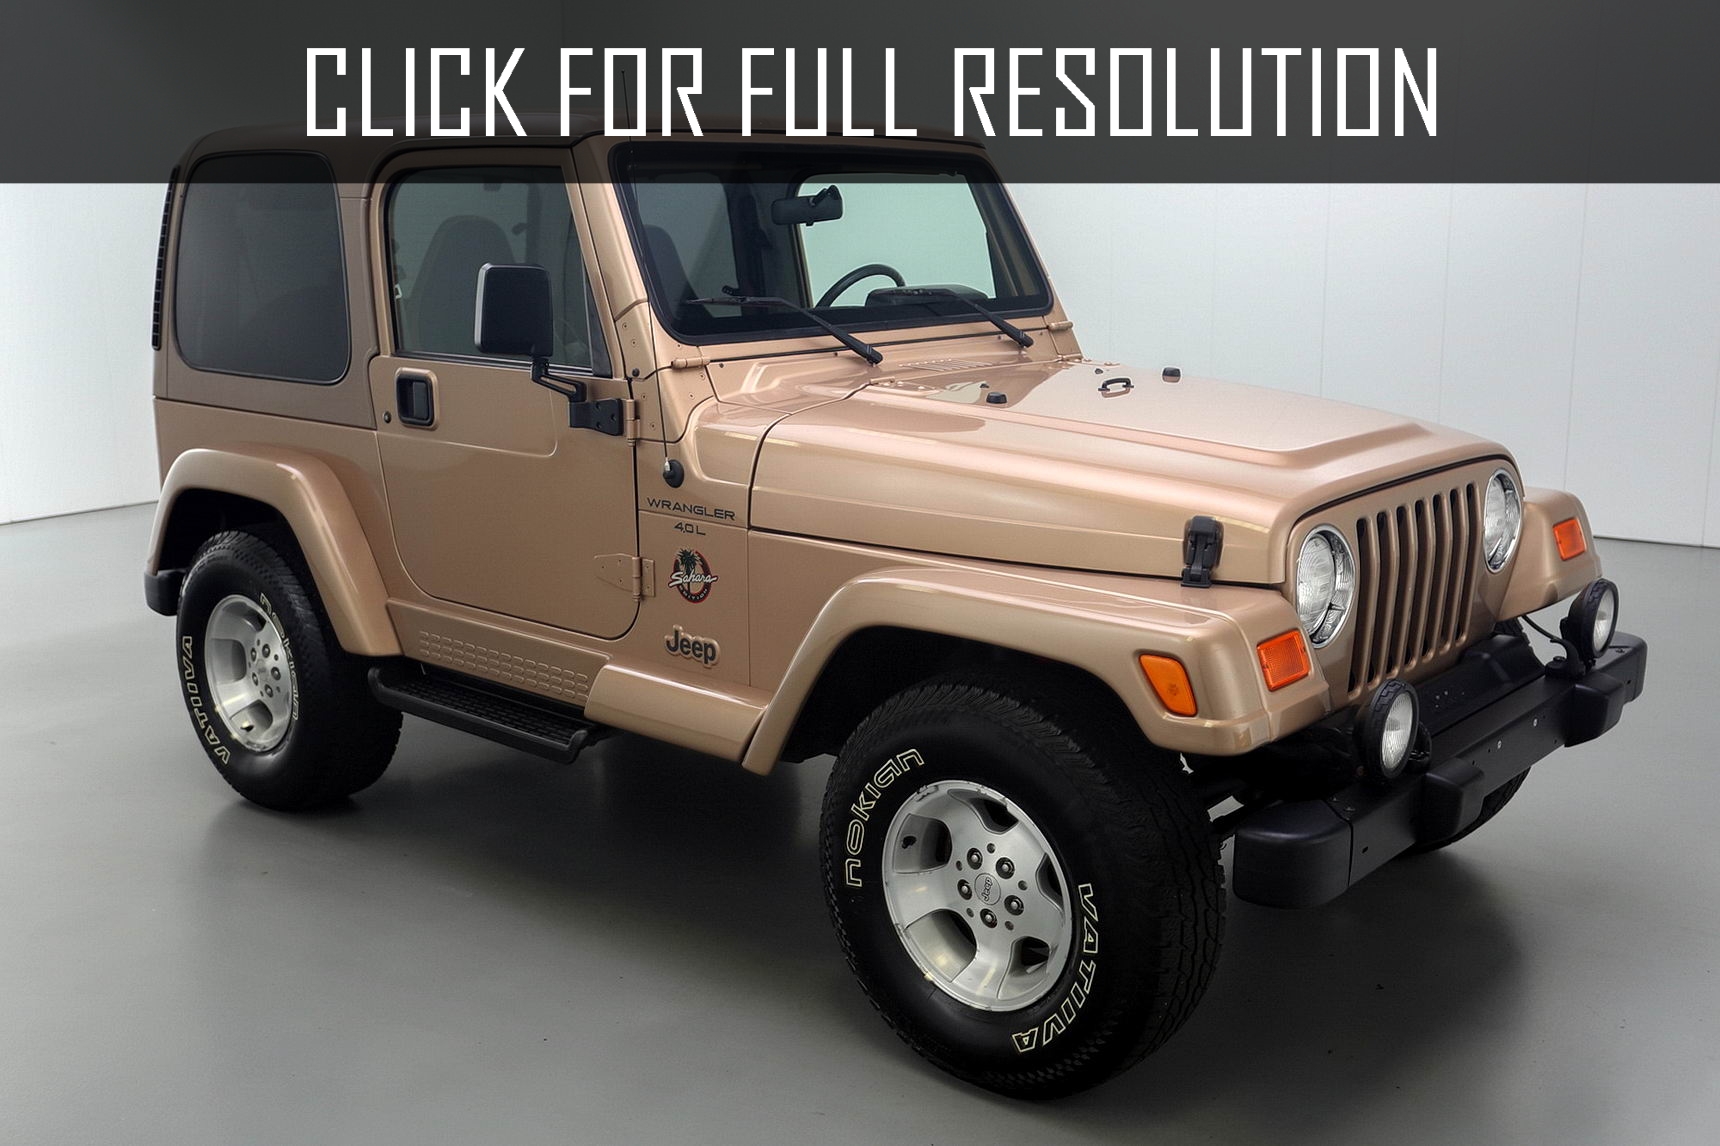 2000 Jeep Wrangler best image gallery #15/22 - share and download